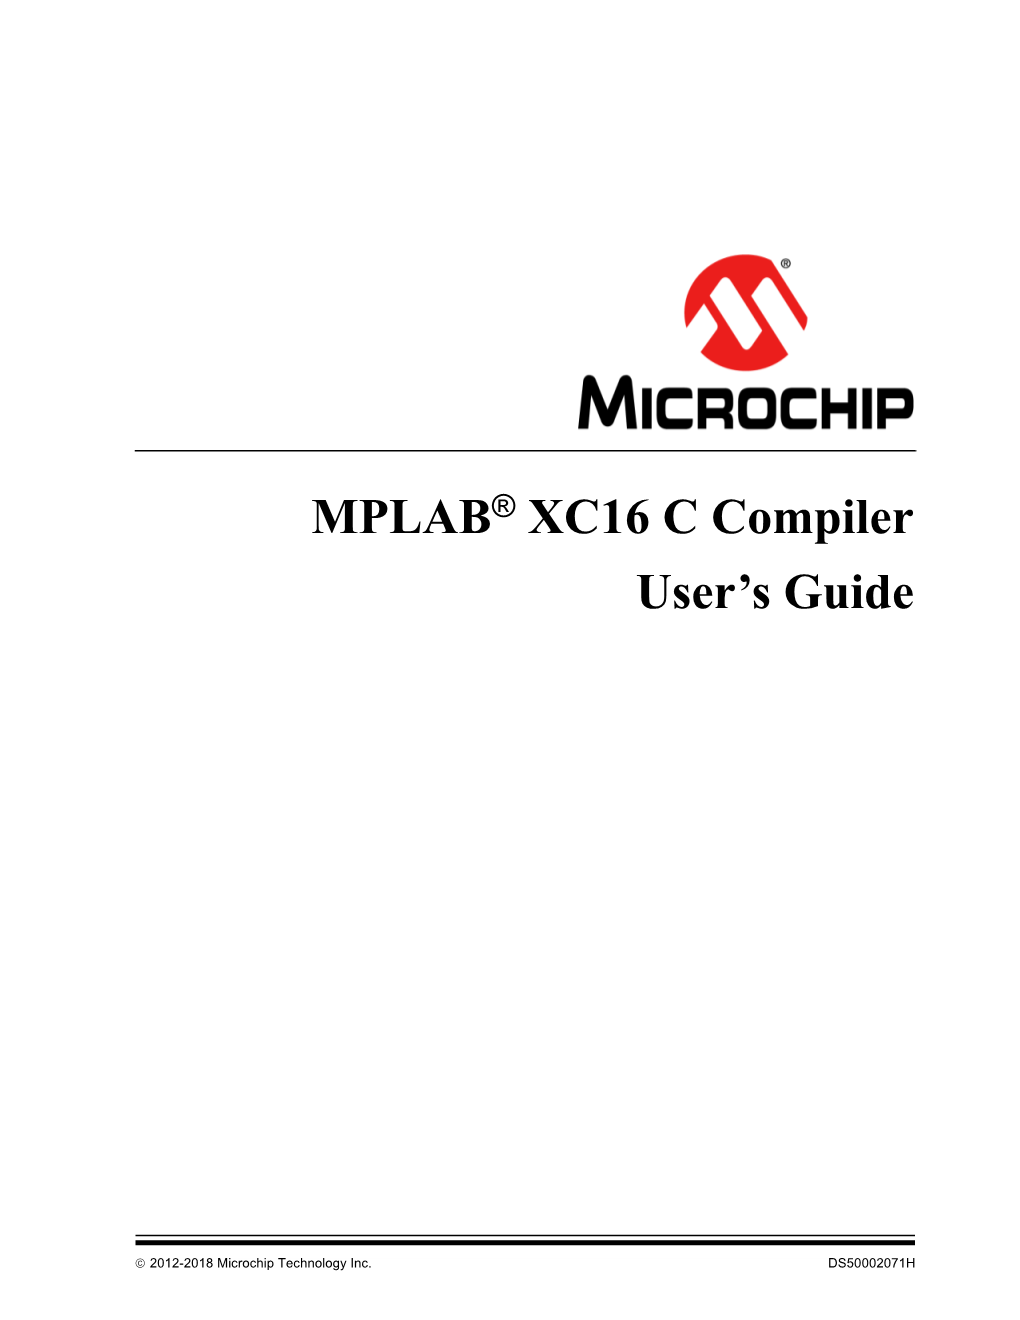 MPLAB XC16 C Compiler Users Guide